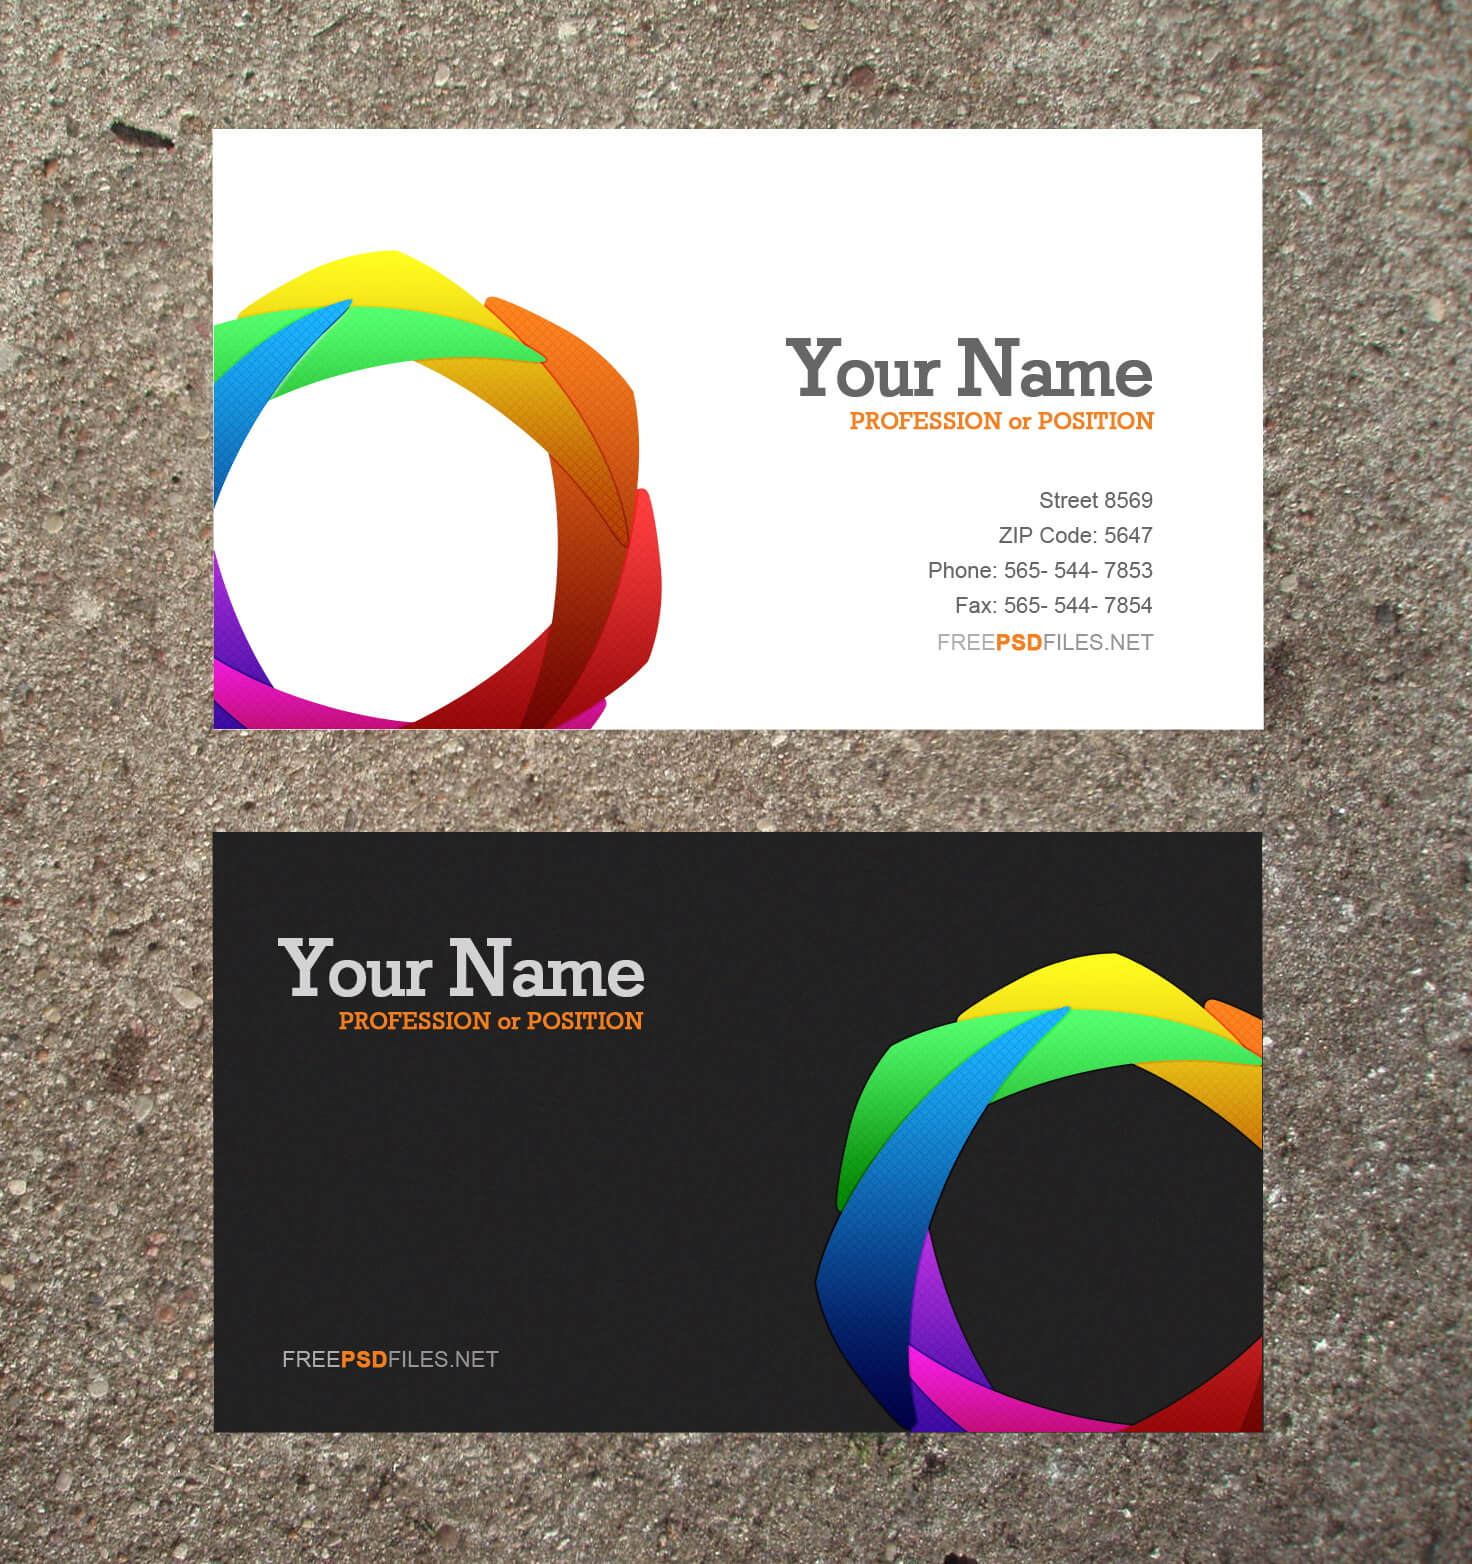 17 Business Cards Templates Free Downloads Images – Free For Blank Business Card Template Download